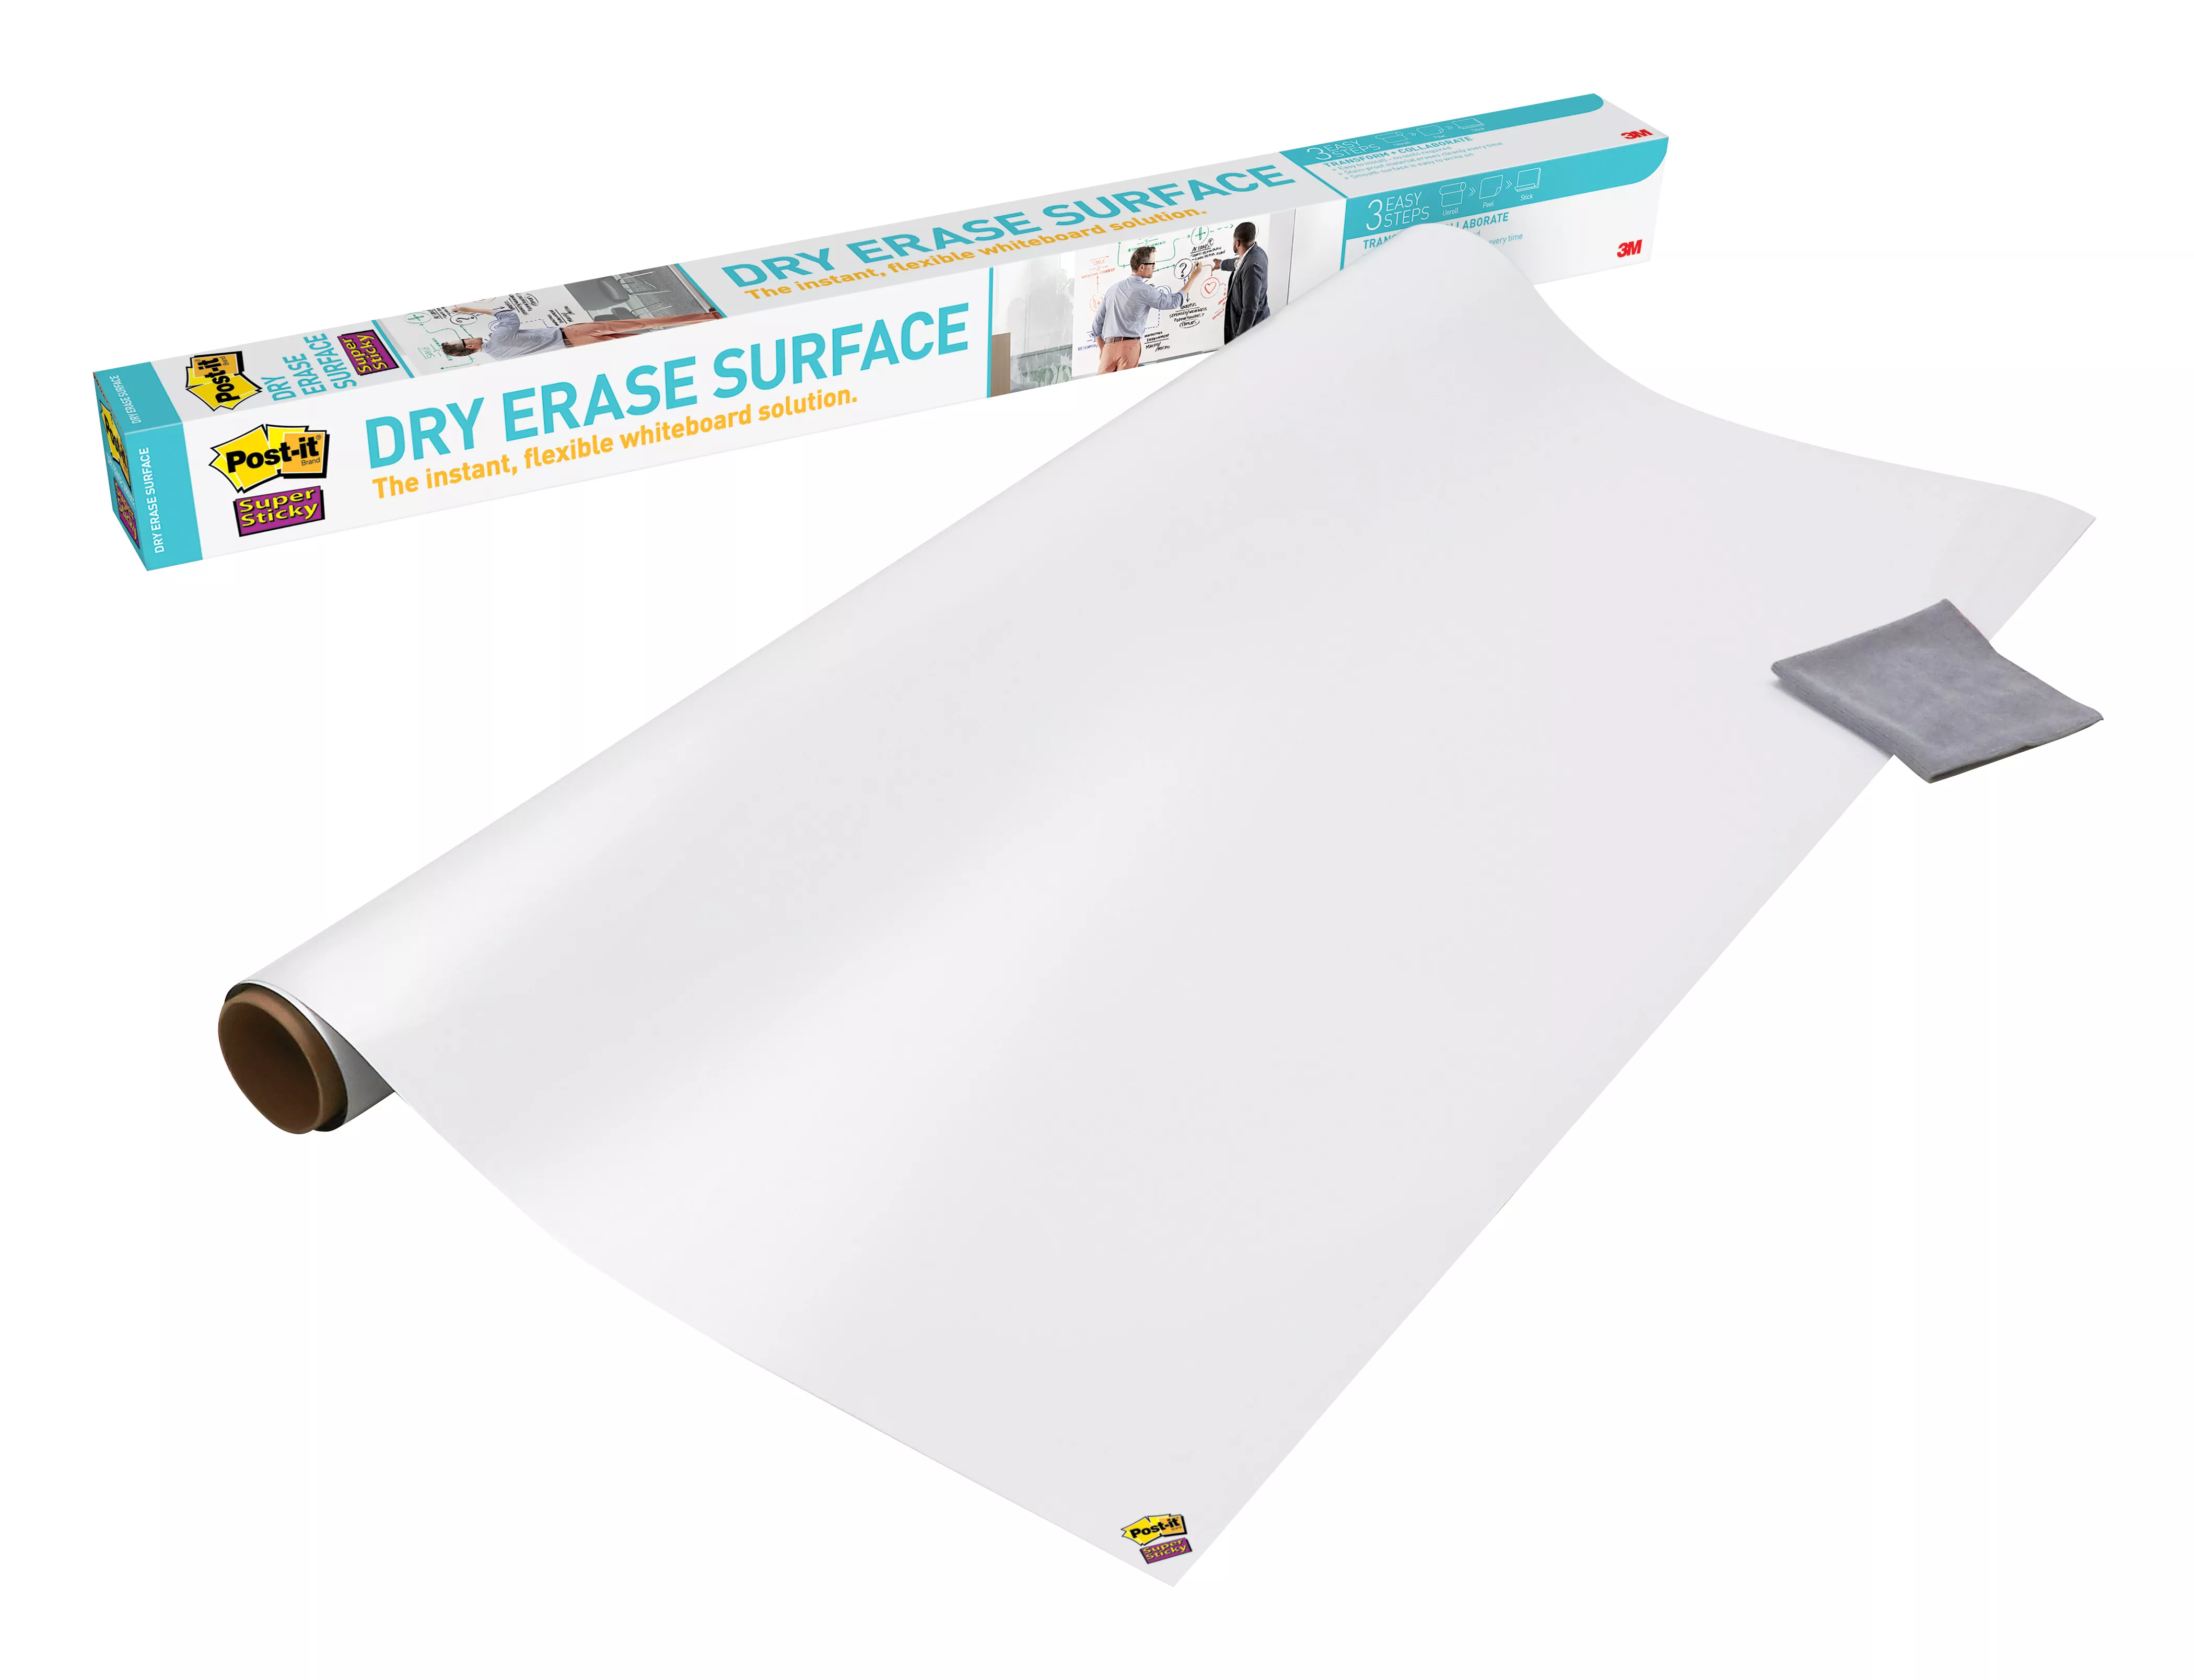 Post-it® Dry Erase Surface DEF6x4, 4 ft x 2 yd (1.21 m x 1.82 m)